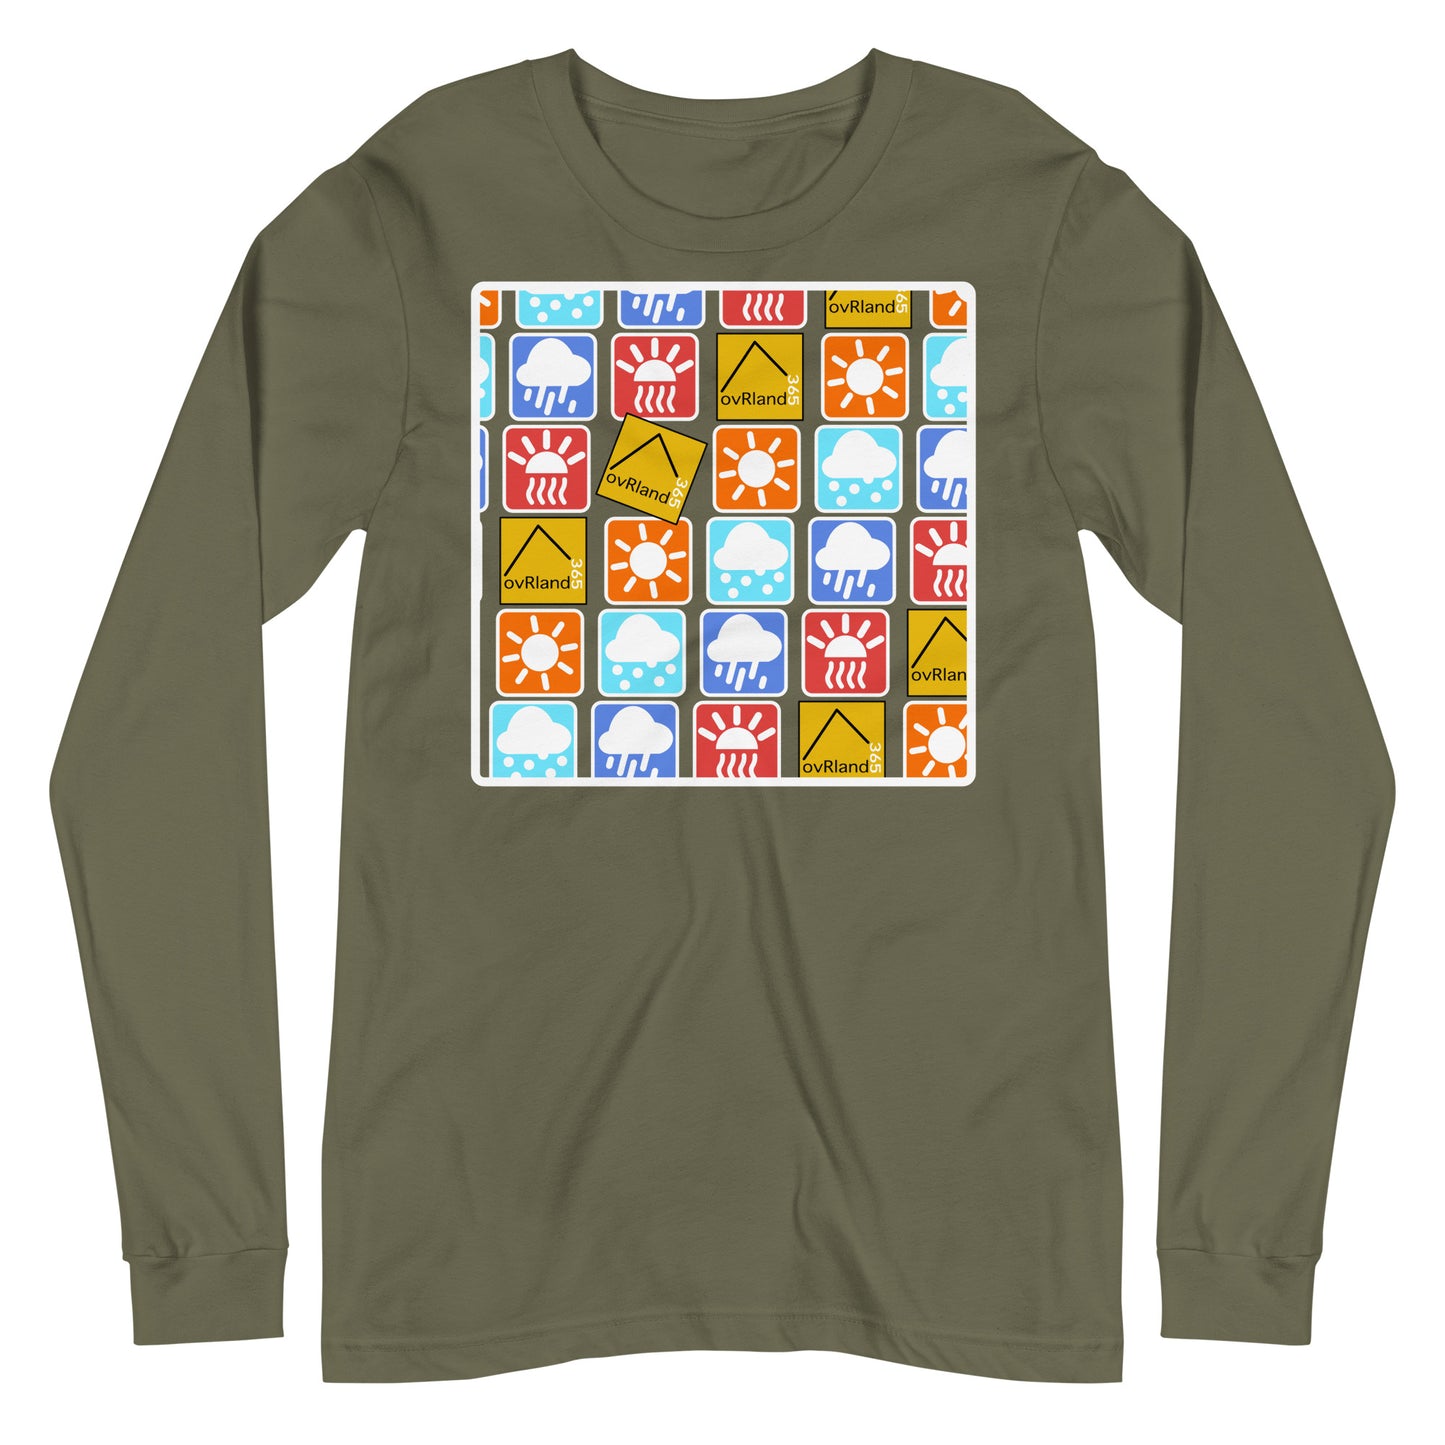 Overland 365 - Weather Icons. Green Long-sleeve. overland365.com